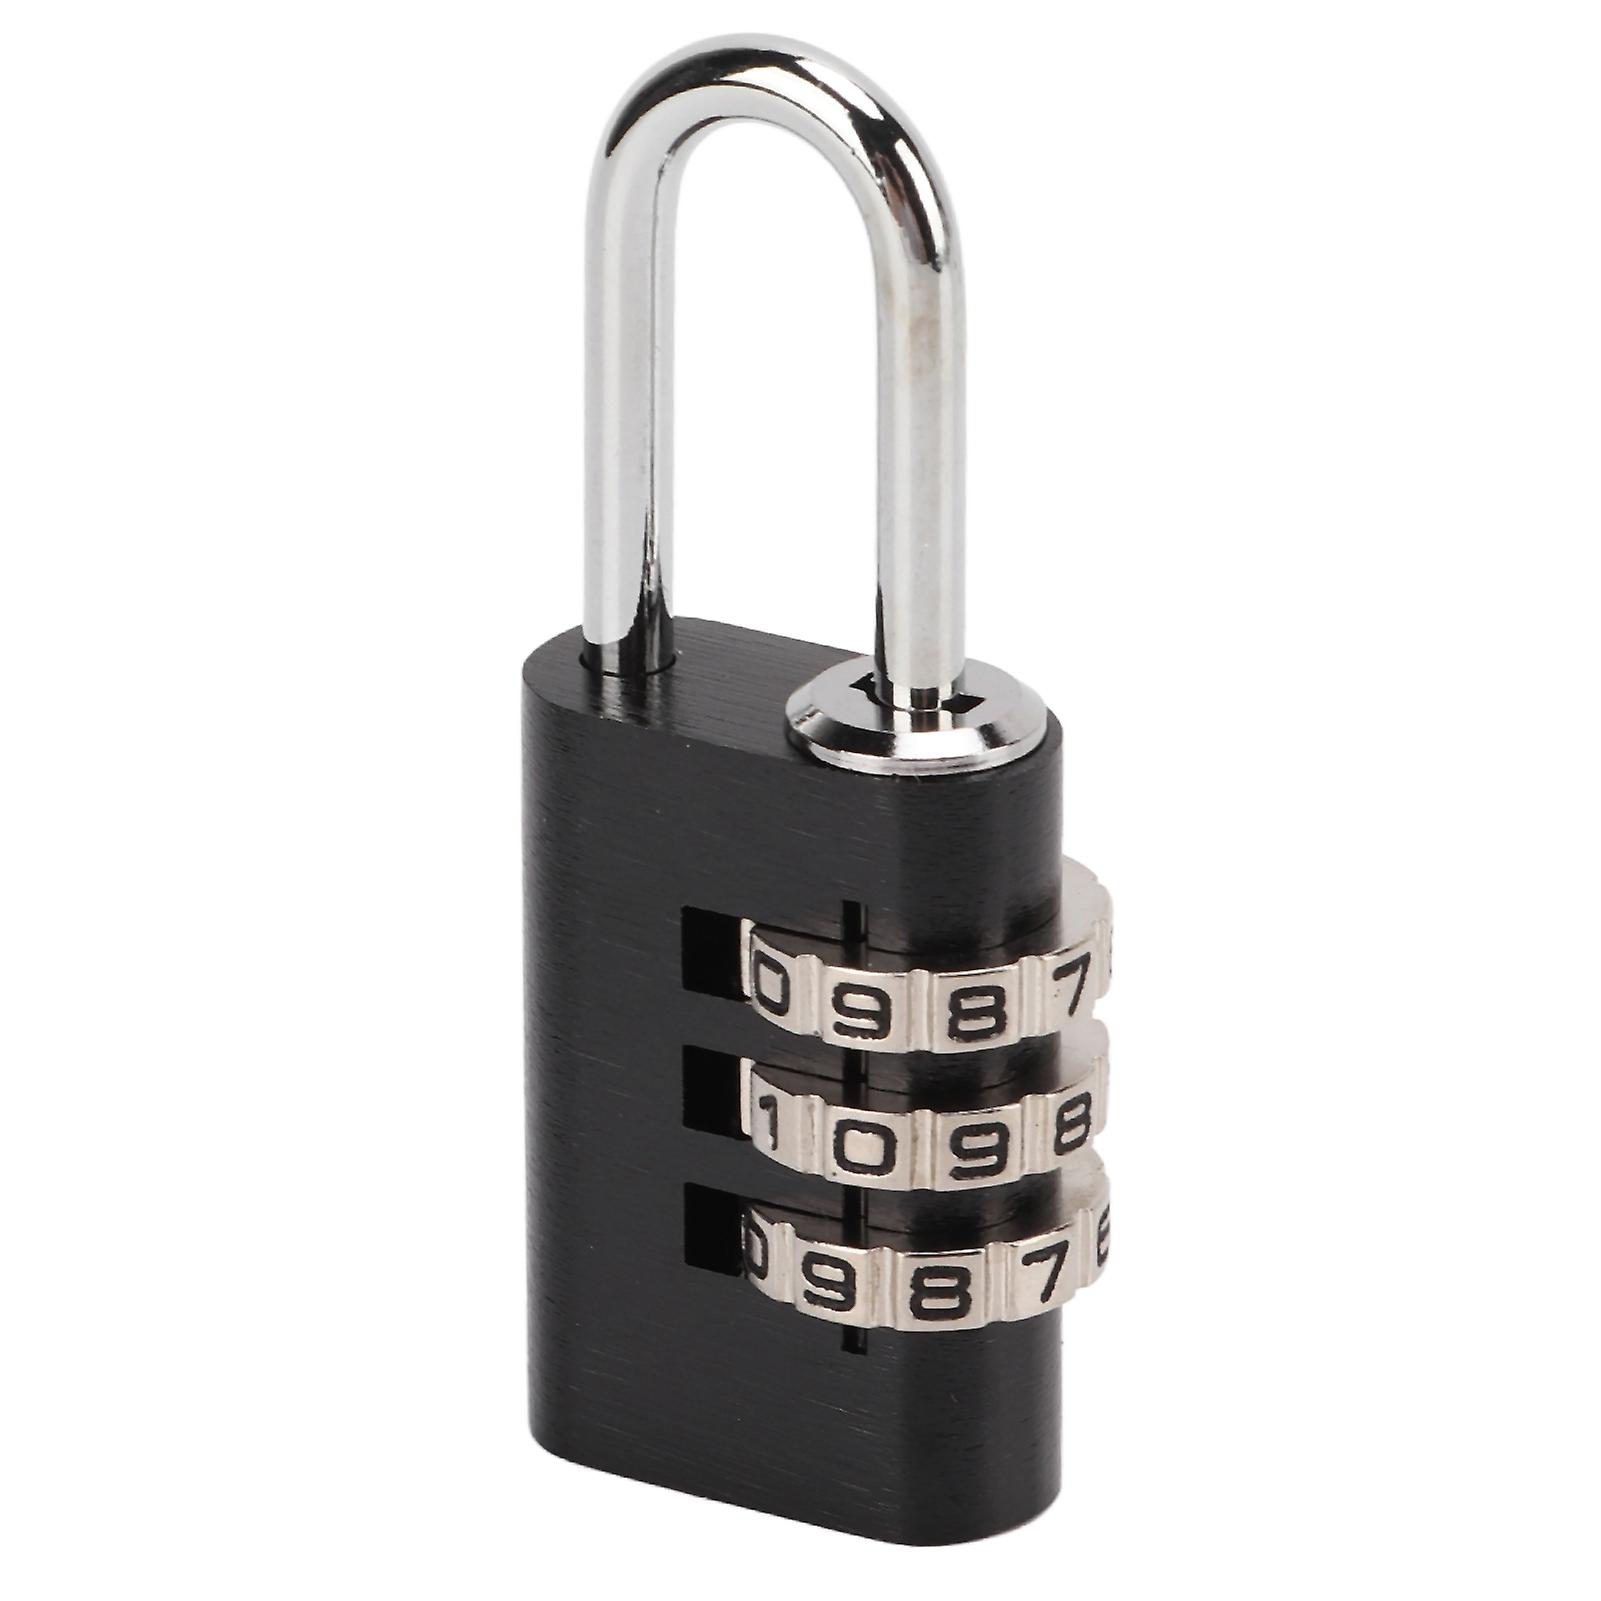 3 Digits Security Combination Padlock Black Solid Aluminum Alloy For Gym Locker Cabinet Toolbox Luggagesmall Padlock